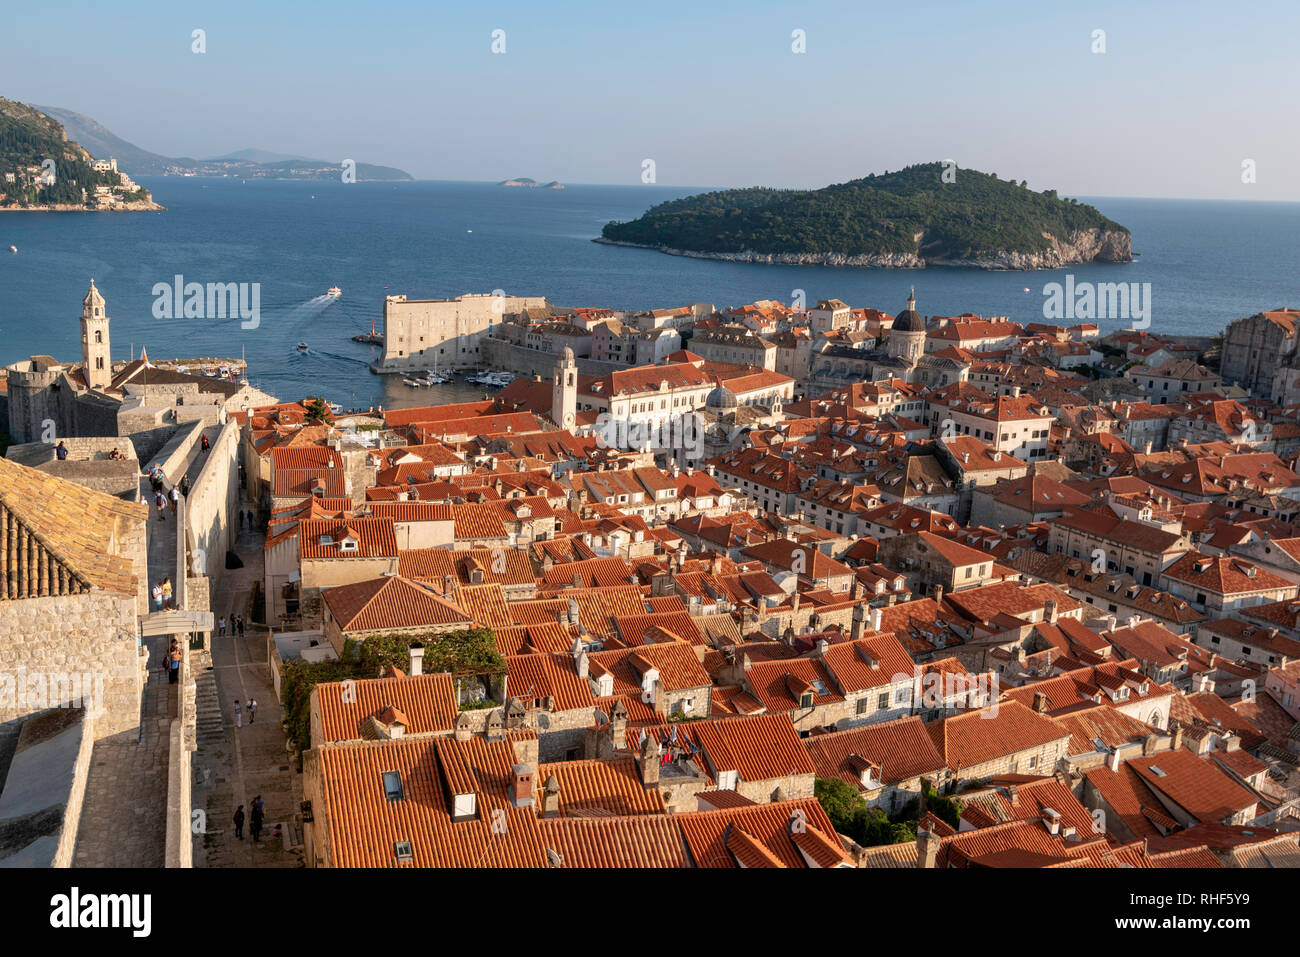 A view of Dubrovnik's old city from the walls Stock Photo